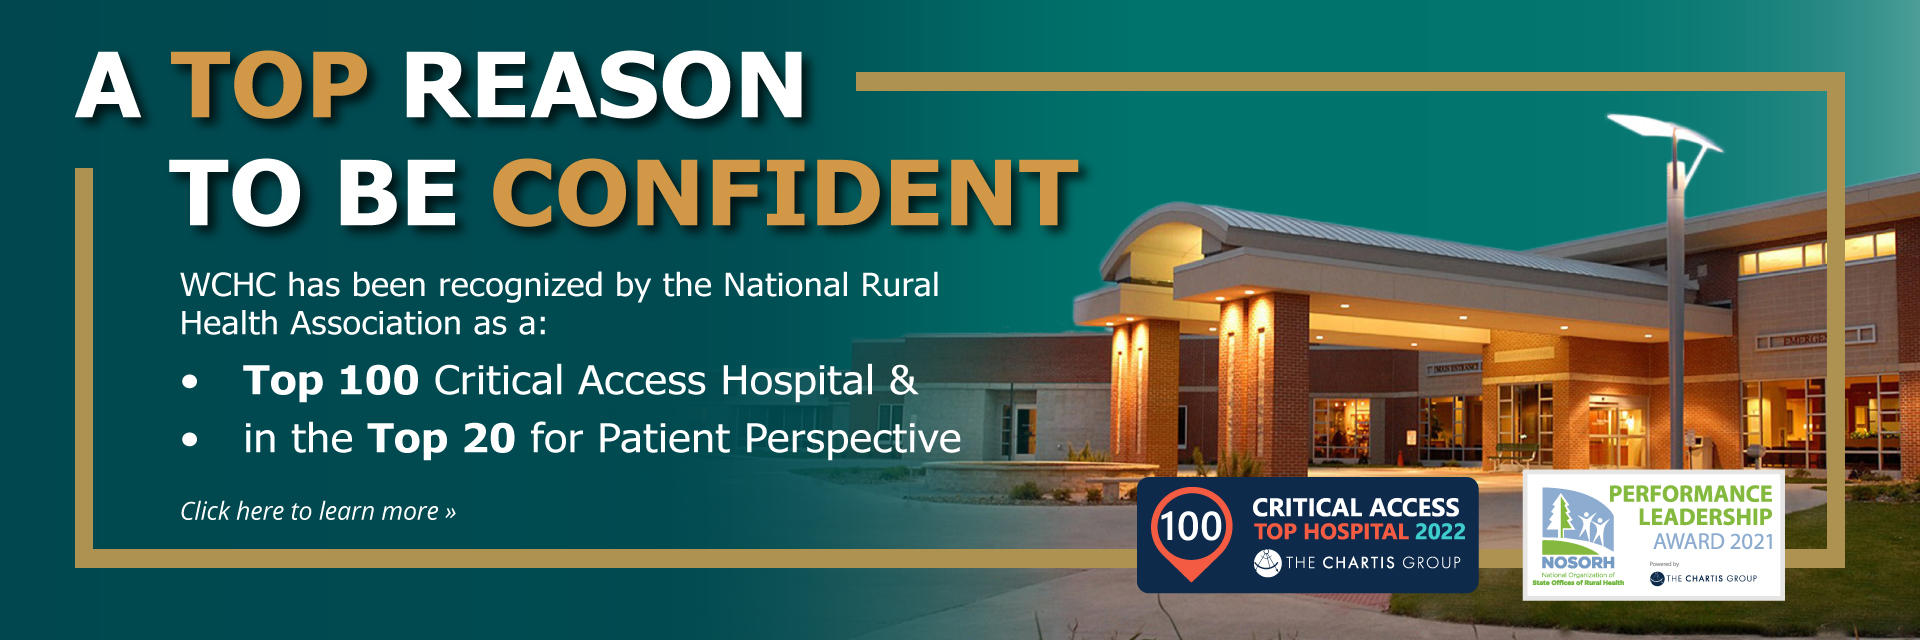 Banner picture of outside shot of Washington County Hospital and Clinics. Banner says:

A TOP REASON TO BE CONFIDENT 

WCHC has been recognized by the National Rural Health Association as a:

* Top 100 Critical Access Hospital &
* In the Top 20 for Patient Perspective

(((CLICK HERE TO LEARN MORE)))